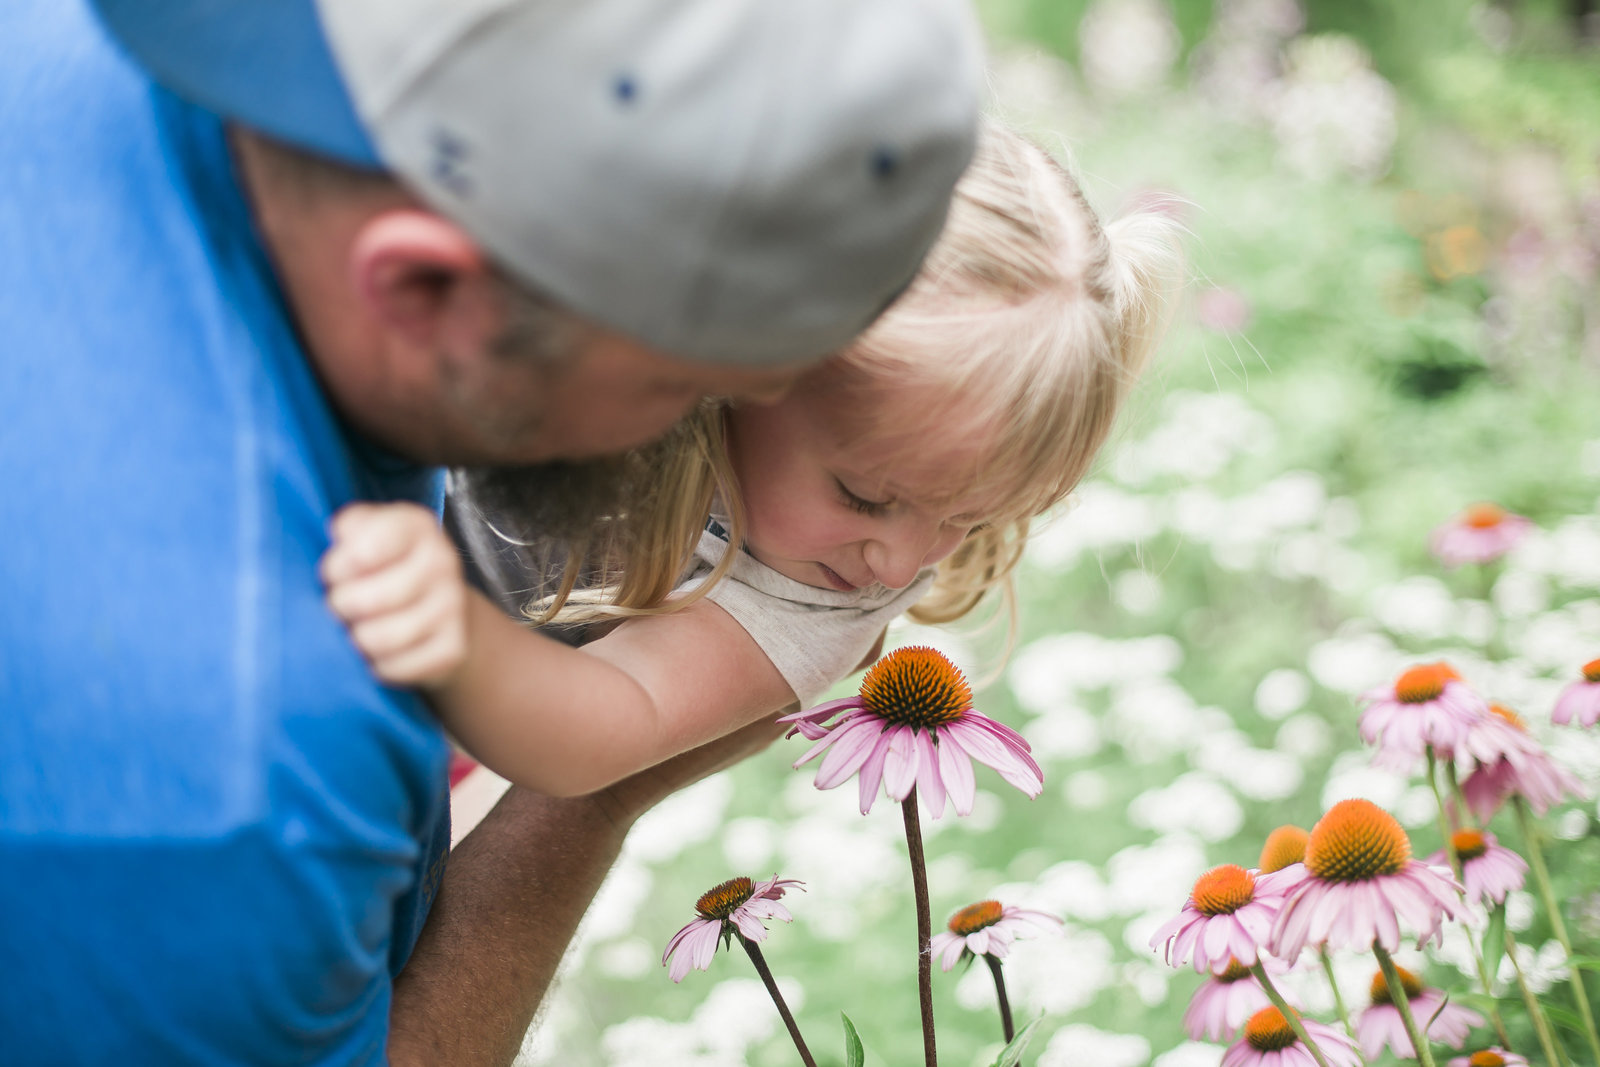 Smelling the flowers with my kiddo